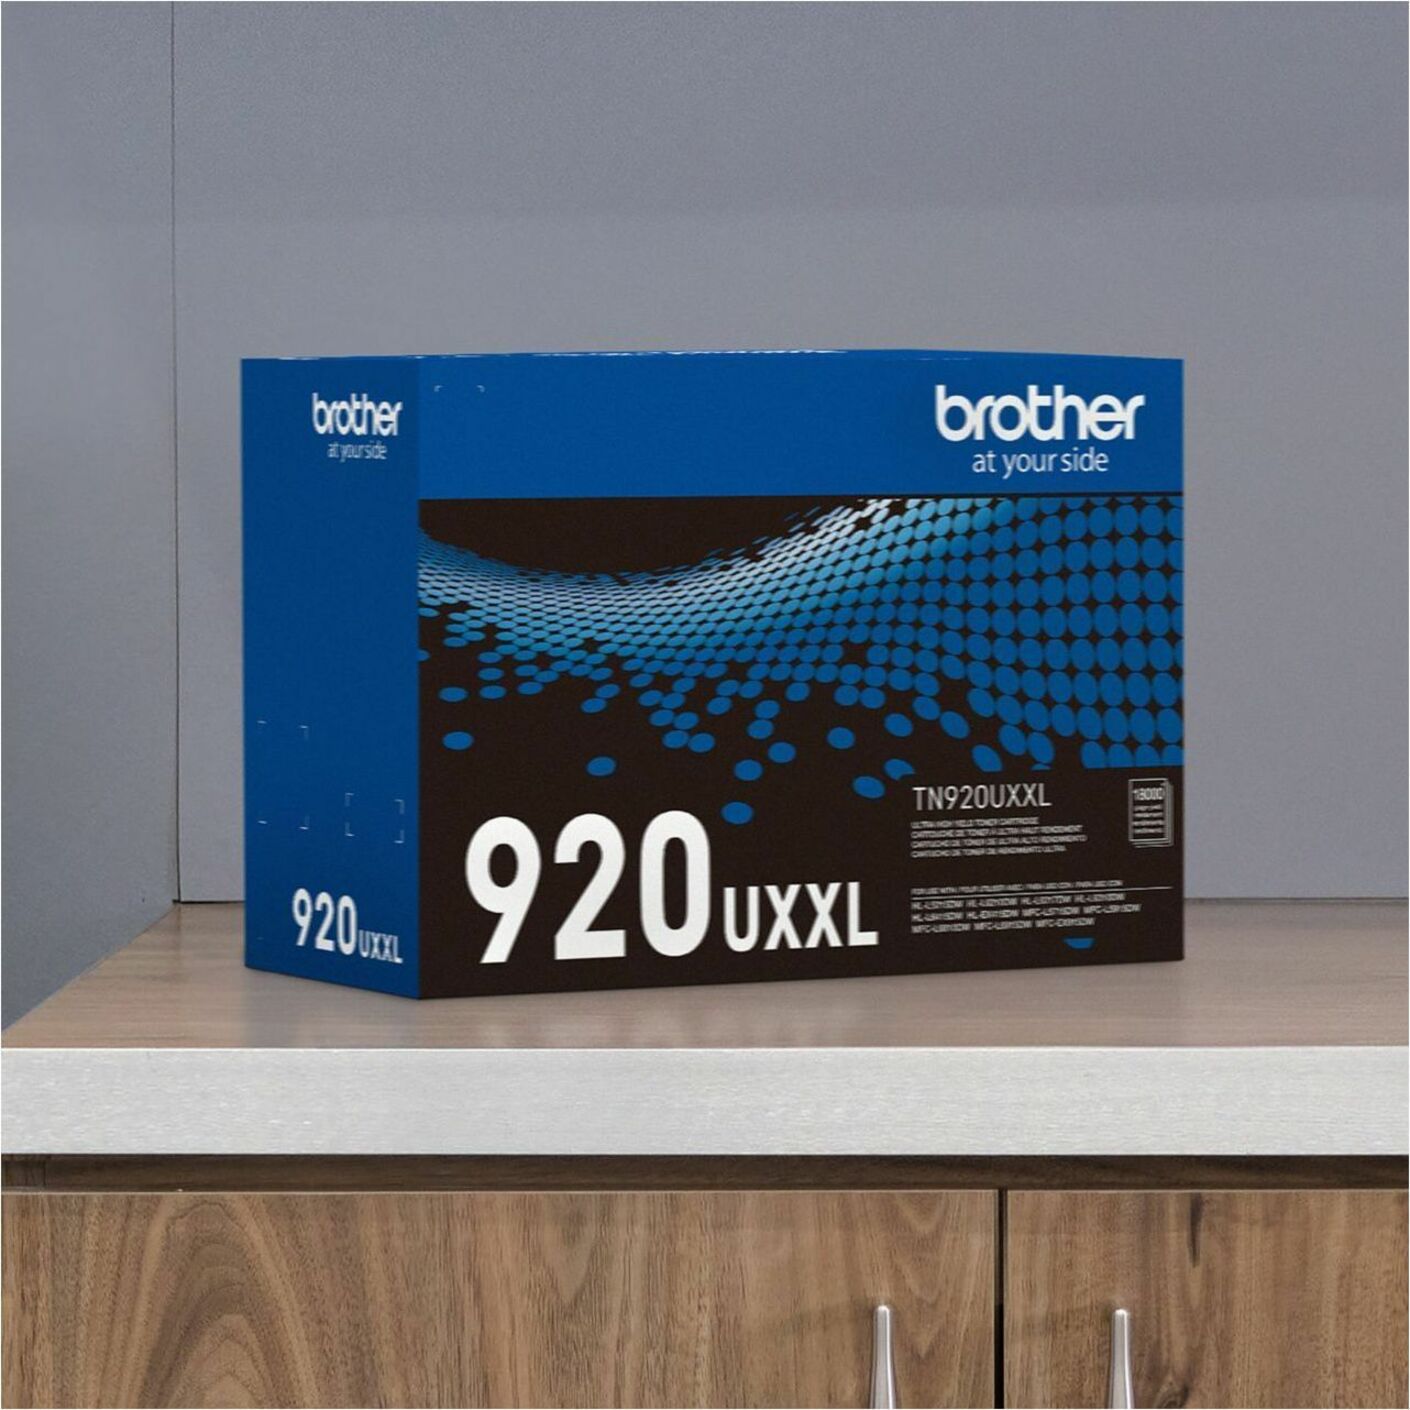 Brother TN920UXXL Ultra High-yield Toner Cartridge, Black, 18000 Pages